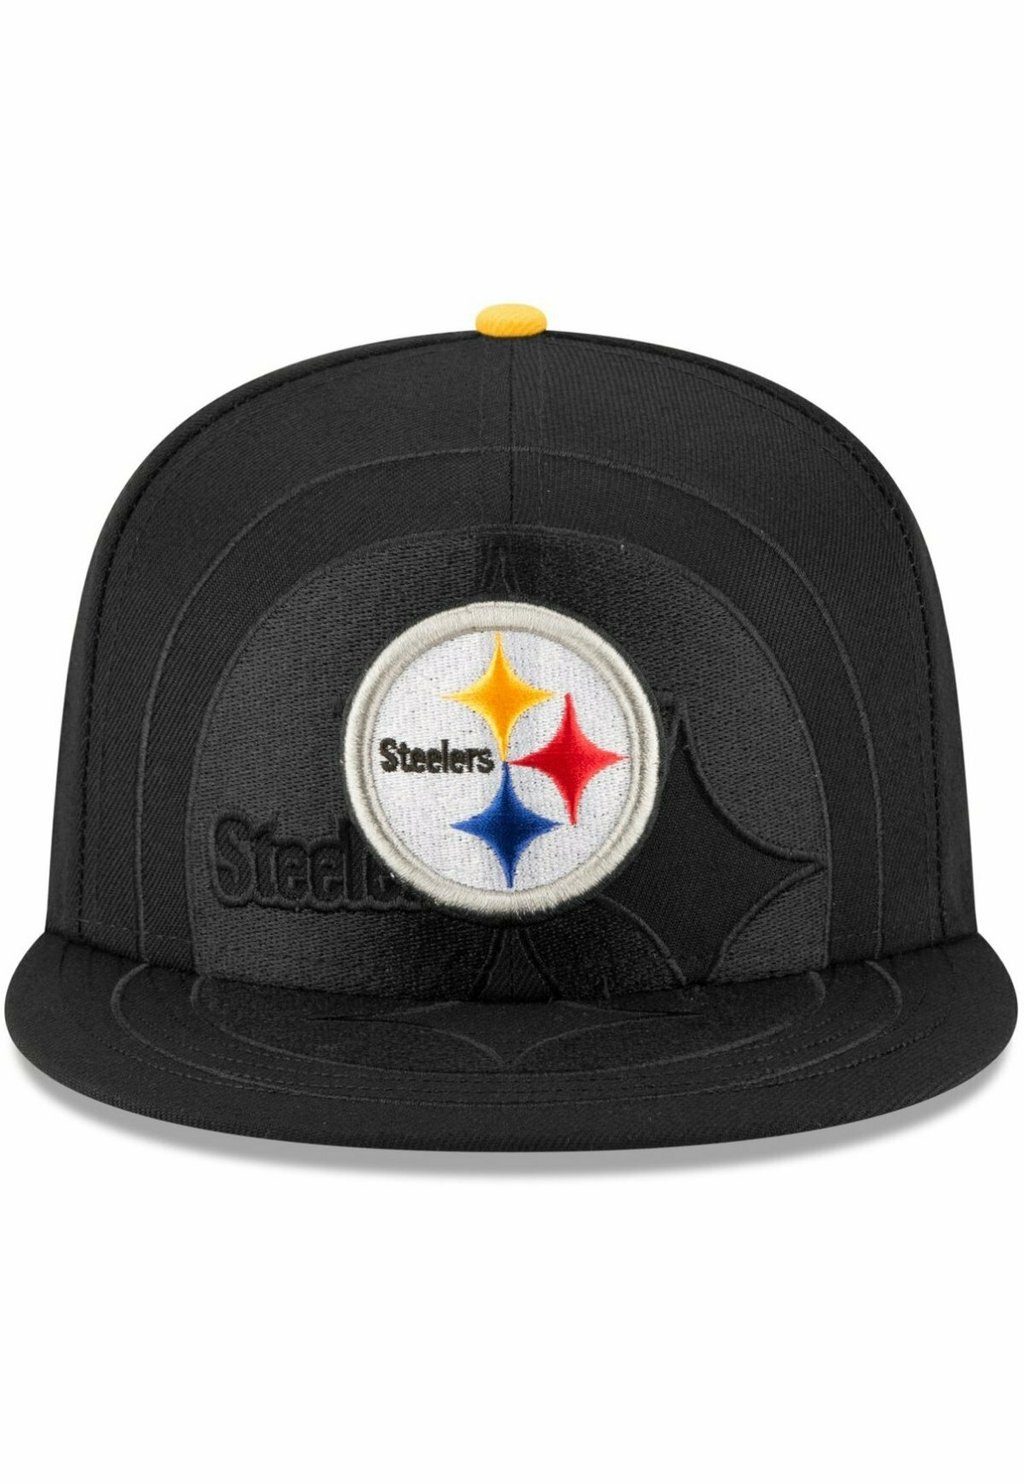 Бейсболка 59FIFTY SPILL LOGO NFL TEAMS New Era, цвет pittsburgh steelers 2021 new steelers men s fans rugby jerseys sports fans bush american wear devin football pittsburgh jersey stitched t shirts